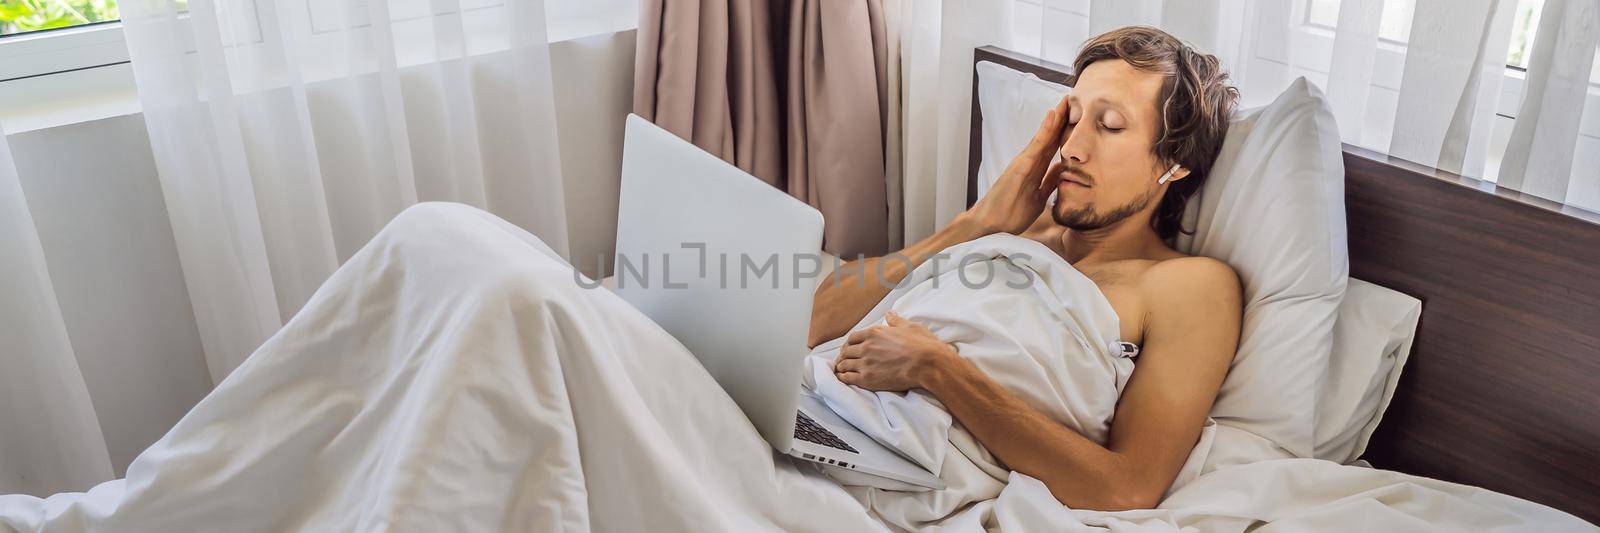 Male patient is sick while lying in his bed and calls an online doctor through a gadget BANNER, LONG FORMAT by galitskaya